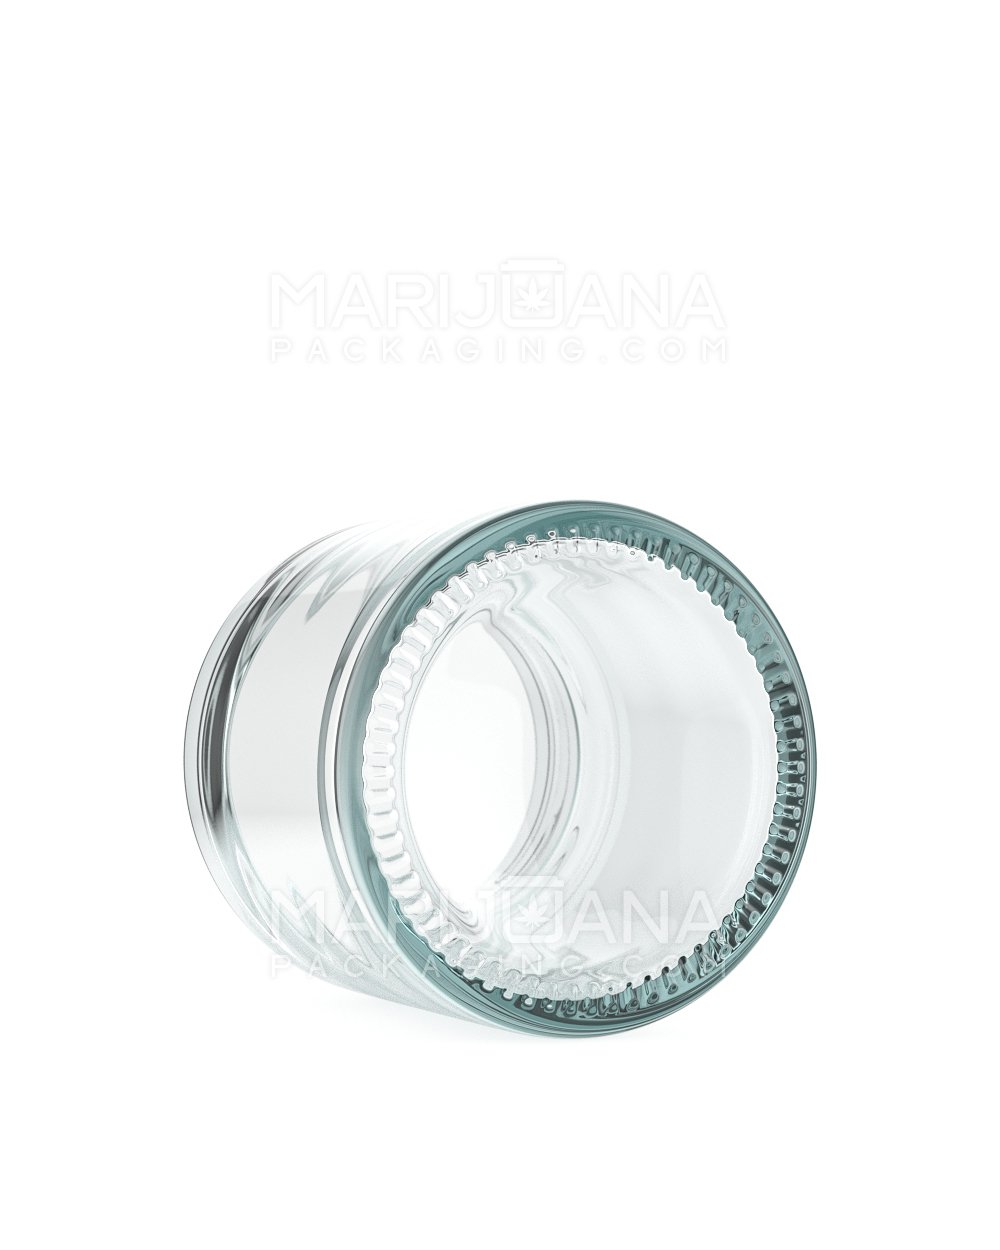 Straight Sided Clear Glass Jars | 50mm - 3oz - 100 Count - 4